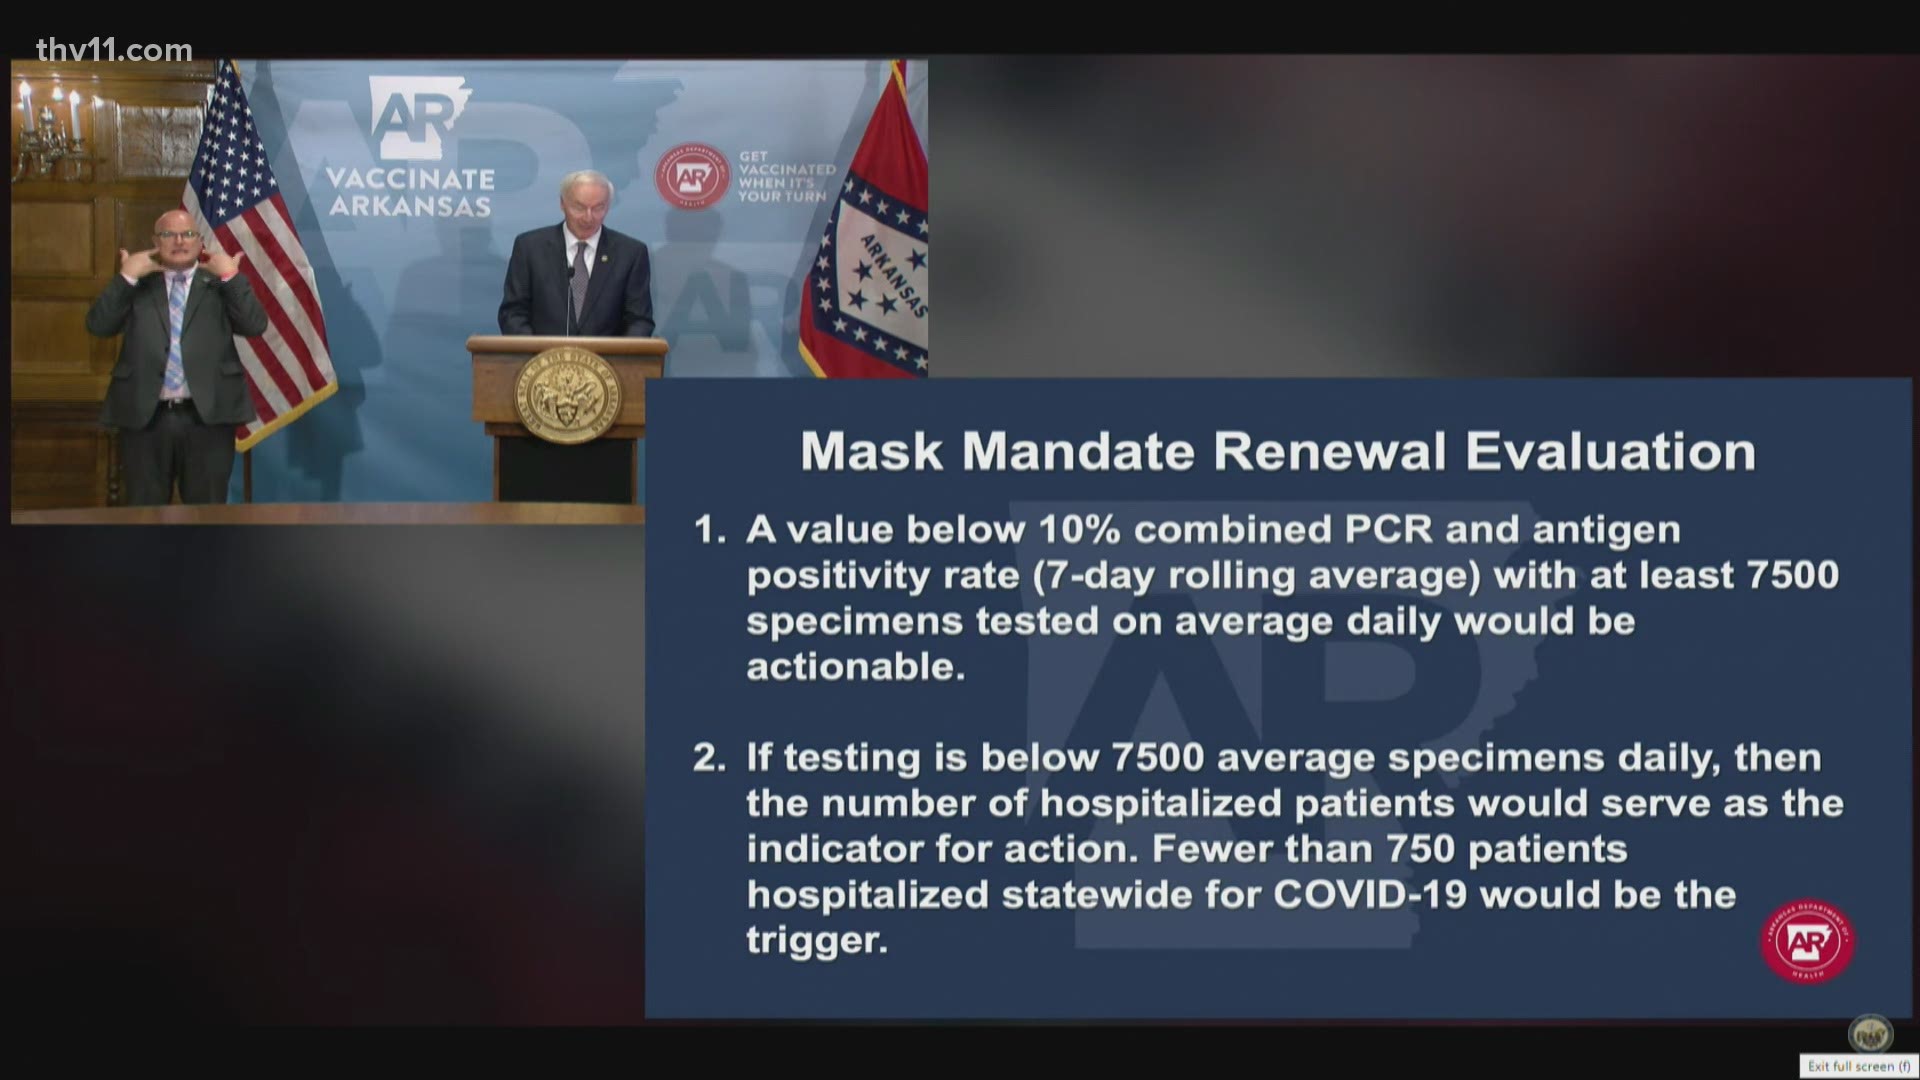 In a press briefing on Tuesday, Gov. Hutchinson announced he was lifting the mask mandate across Arkansas, effective immediately.